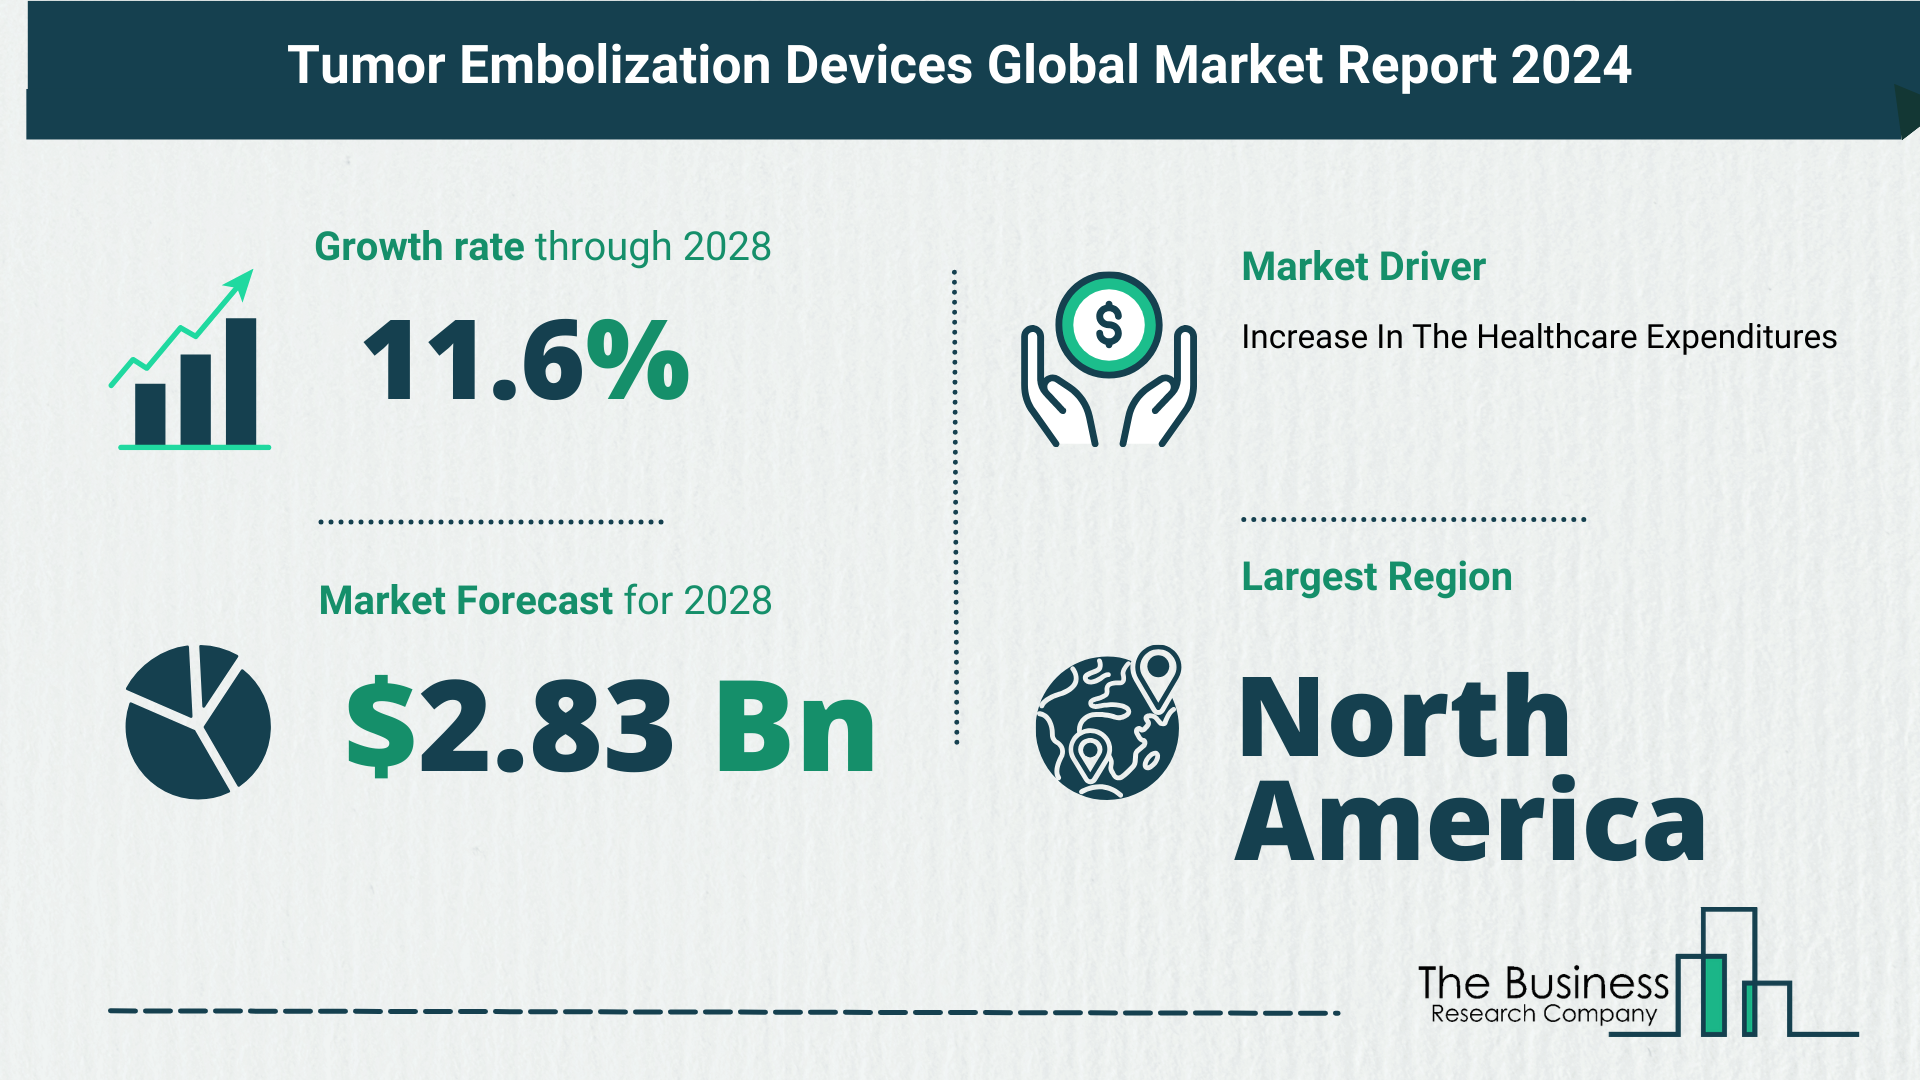 Top 5 Insights From The Tumor Embolization Devices Market Report 2024